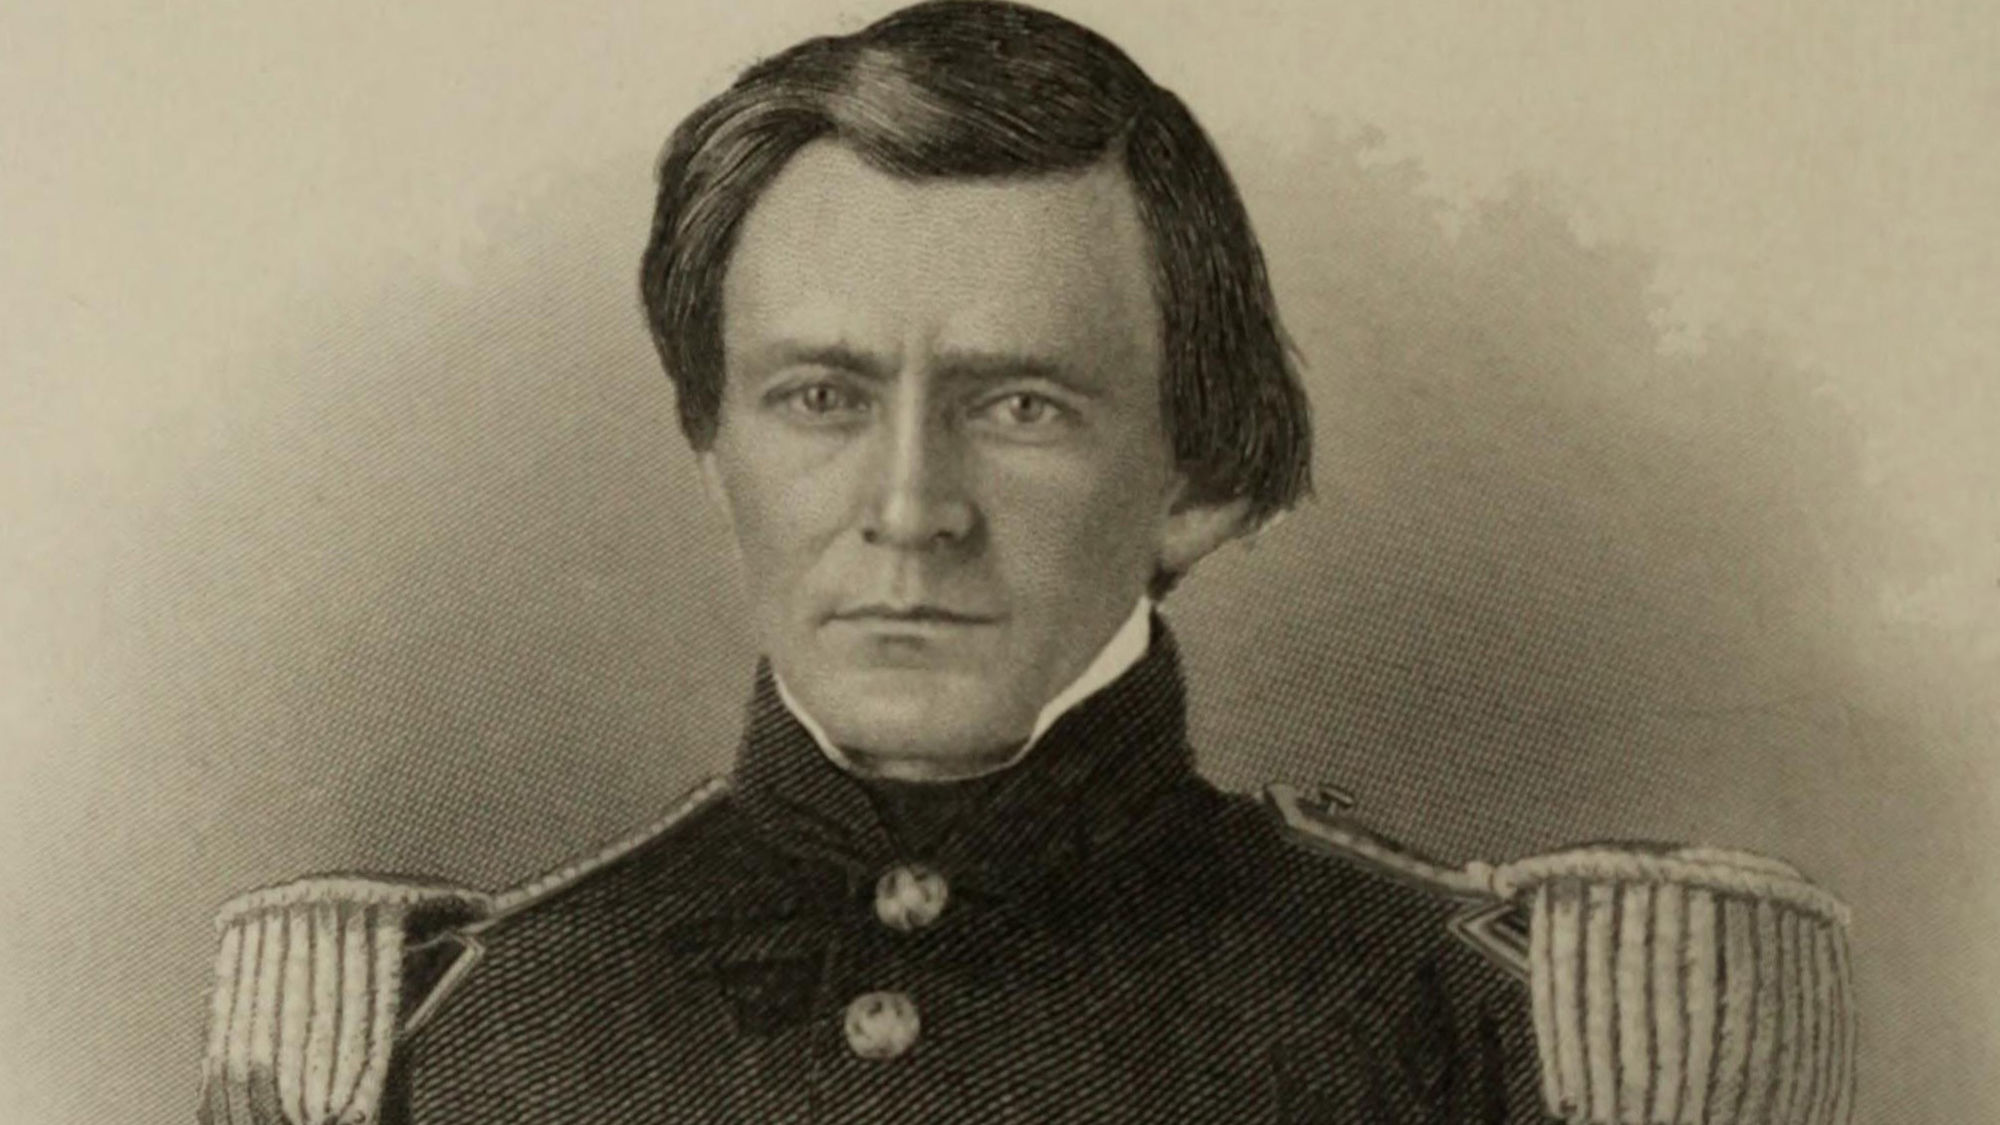 The Key Way West Point Prepared Ulysses S. Grant for the Civil War